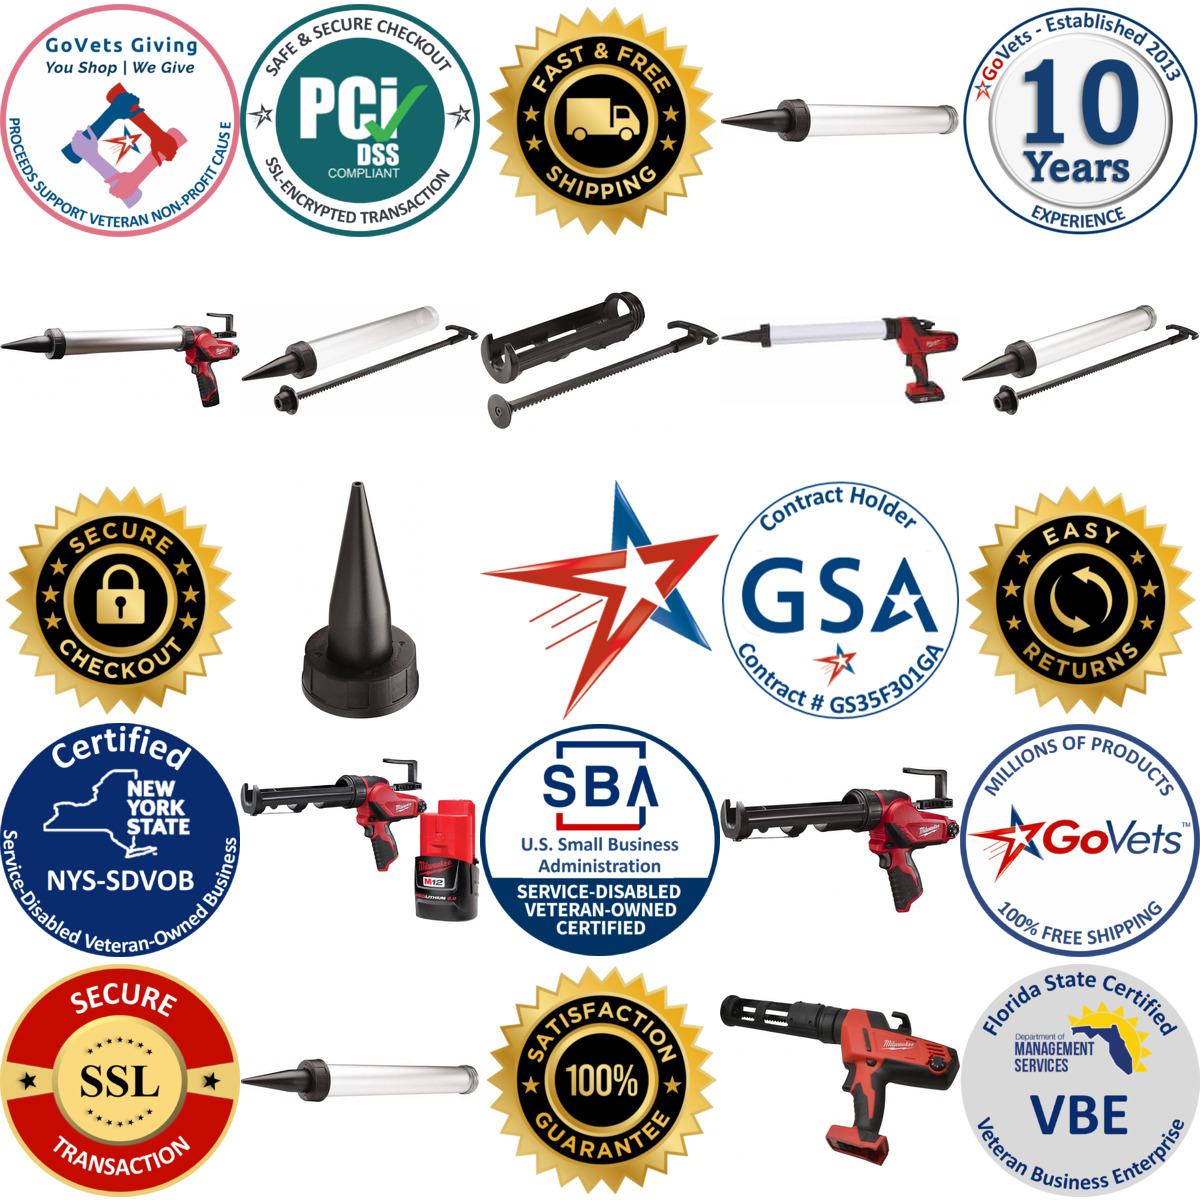 A selection of Milwaukee Tool products on GoVets